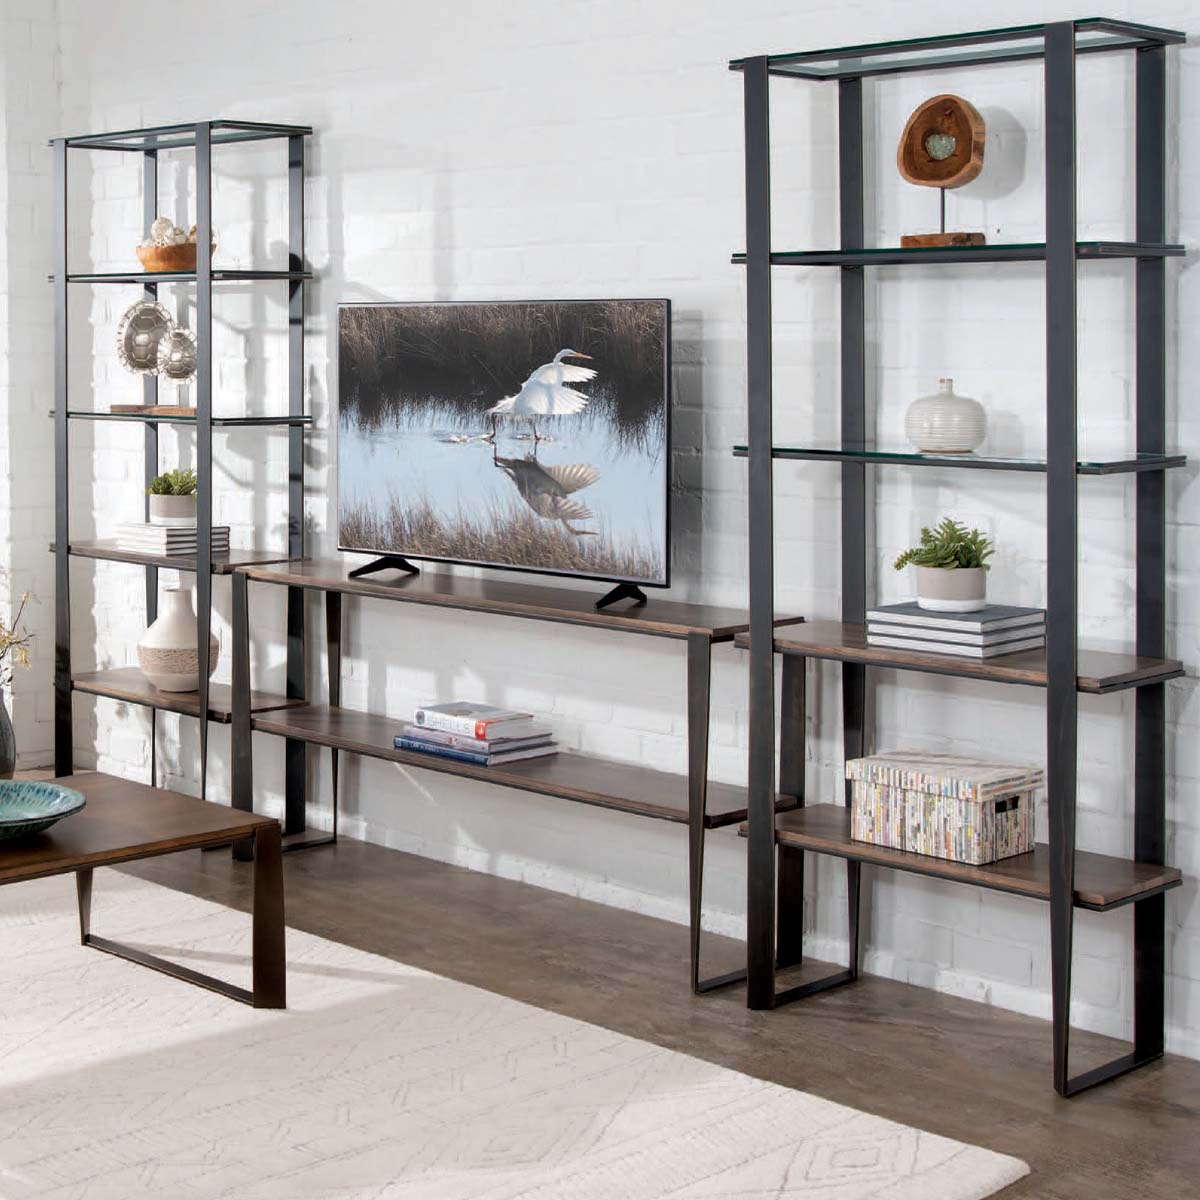 charleston-forge-8230-hatteras-etagere-7807-console-7800-cocktail table-web-sq